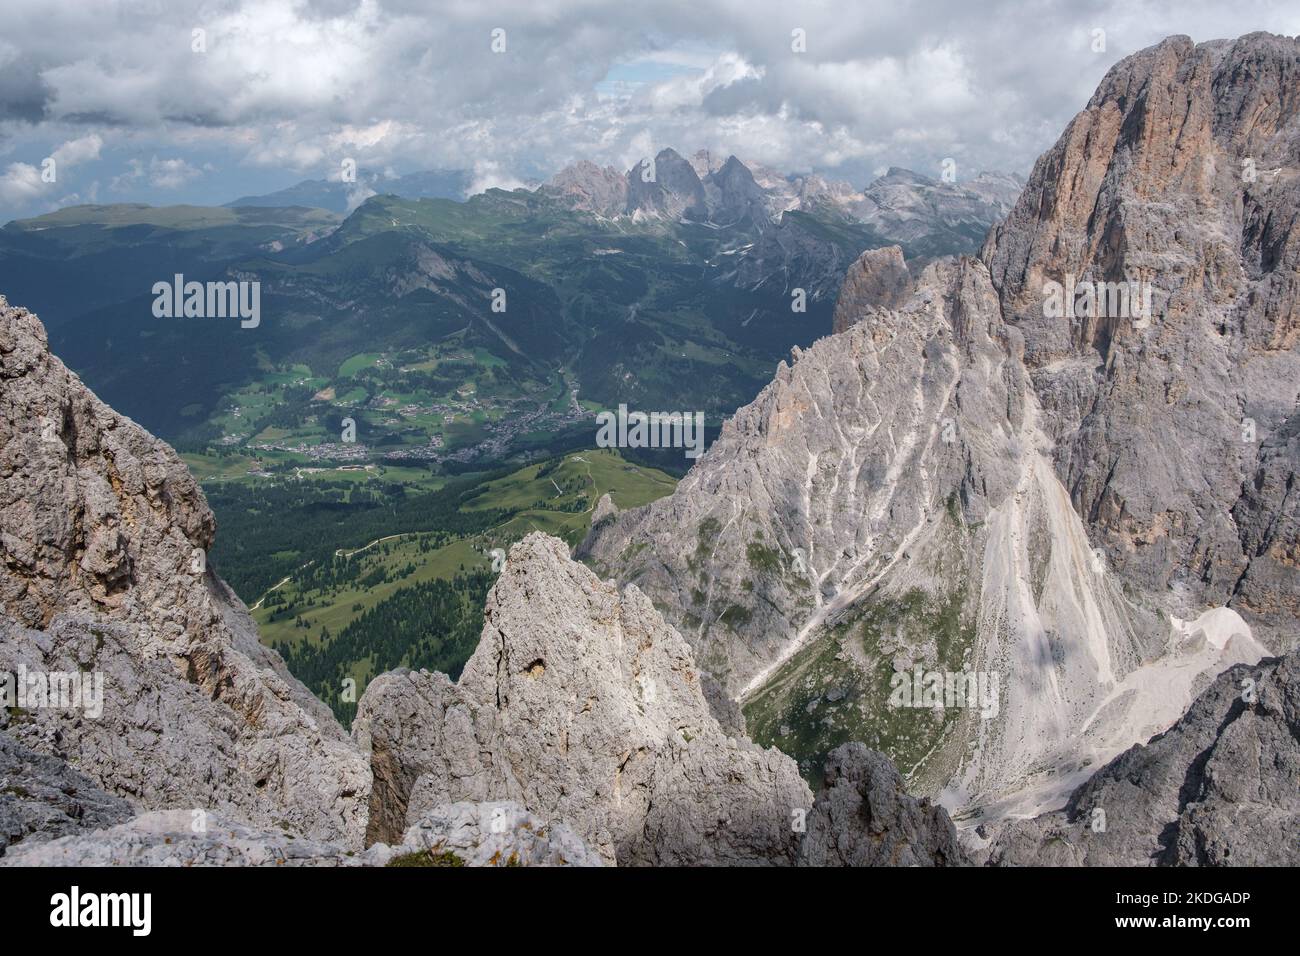 View from the Plattkofel summit to the Val Gardena valley with the town Sankt Christina and the Seceda mountain in background. Stock Photo